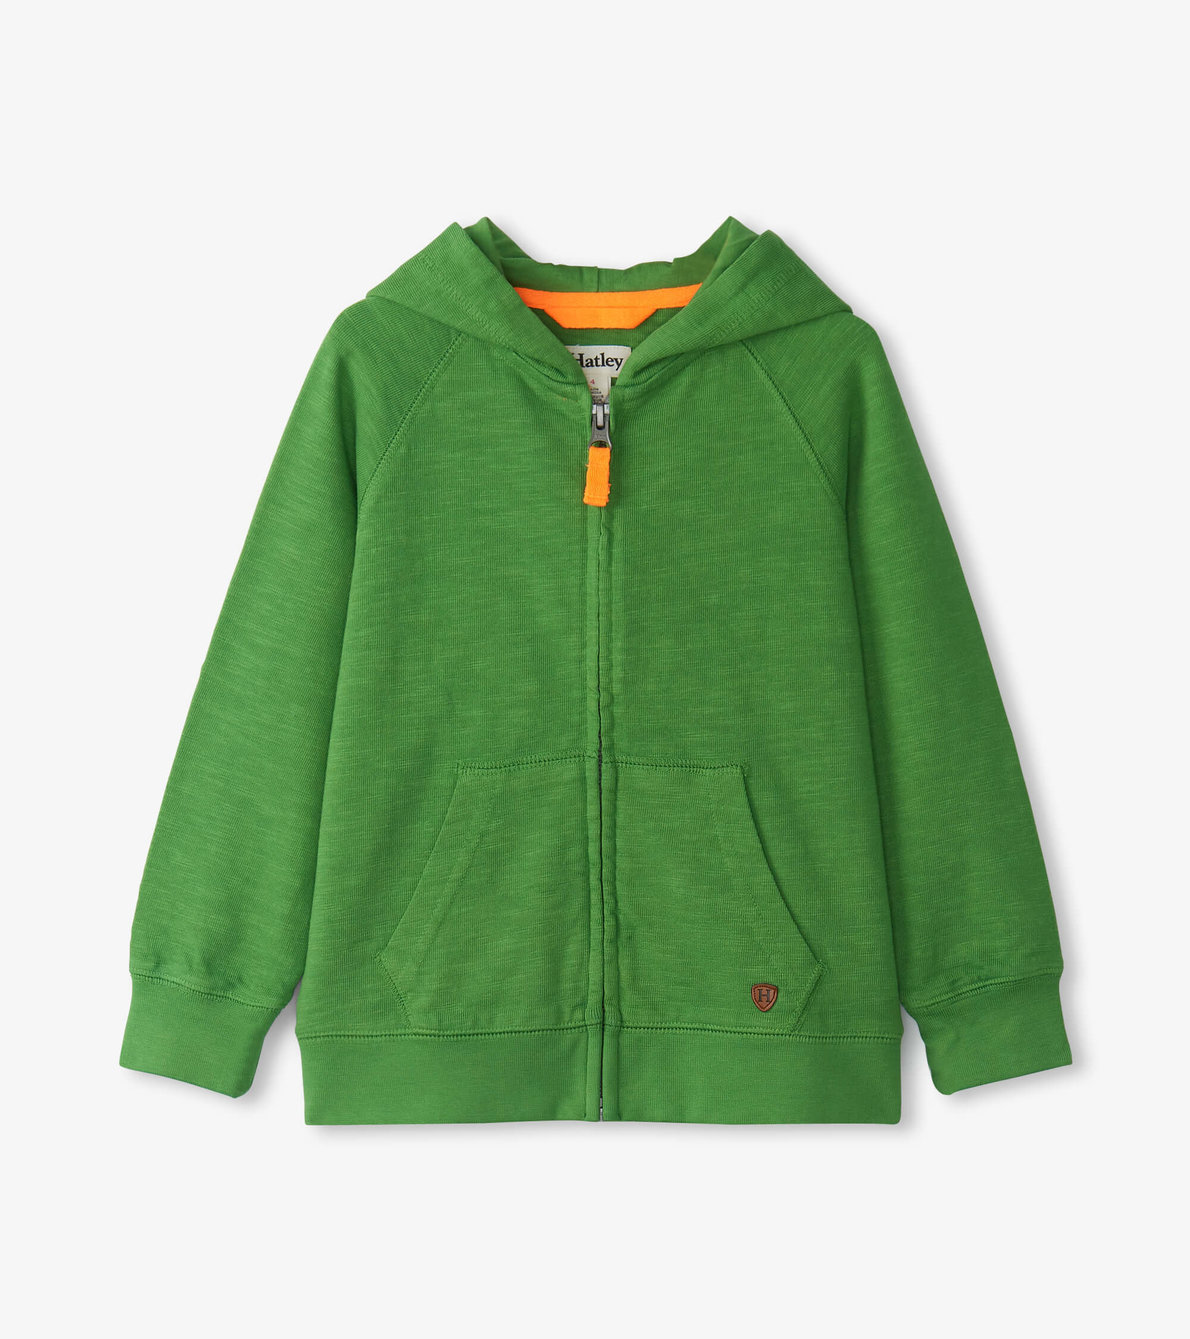 View larger image of Boys Camp Green Zip-Up Hoodie